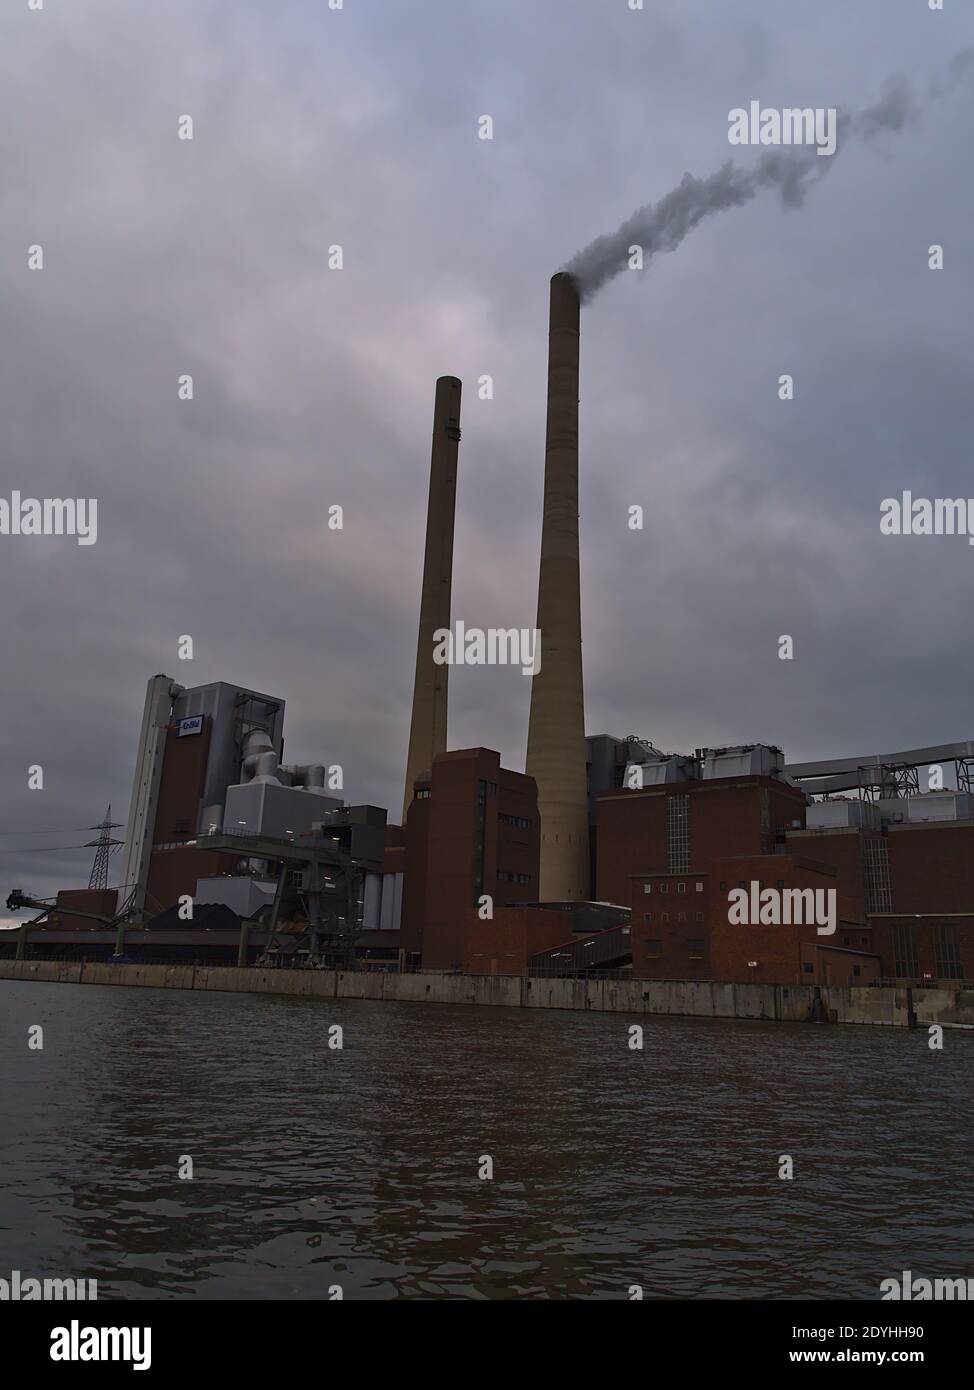 Big chimney stacks of coal-fired Heilbronn Power Station operated by Energie Baden-Württemberg (ENBW) on the shore of Neckar river on winter day. Stock Photo